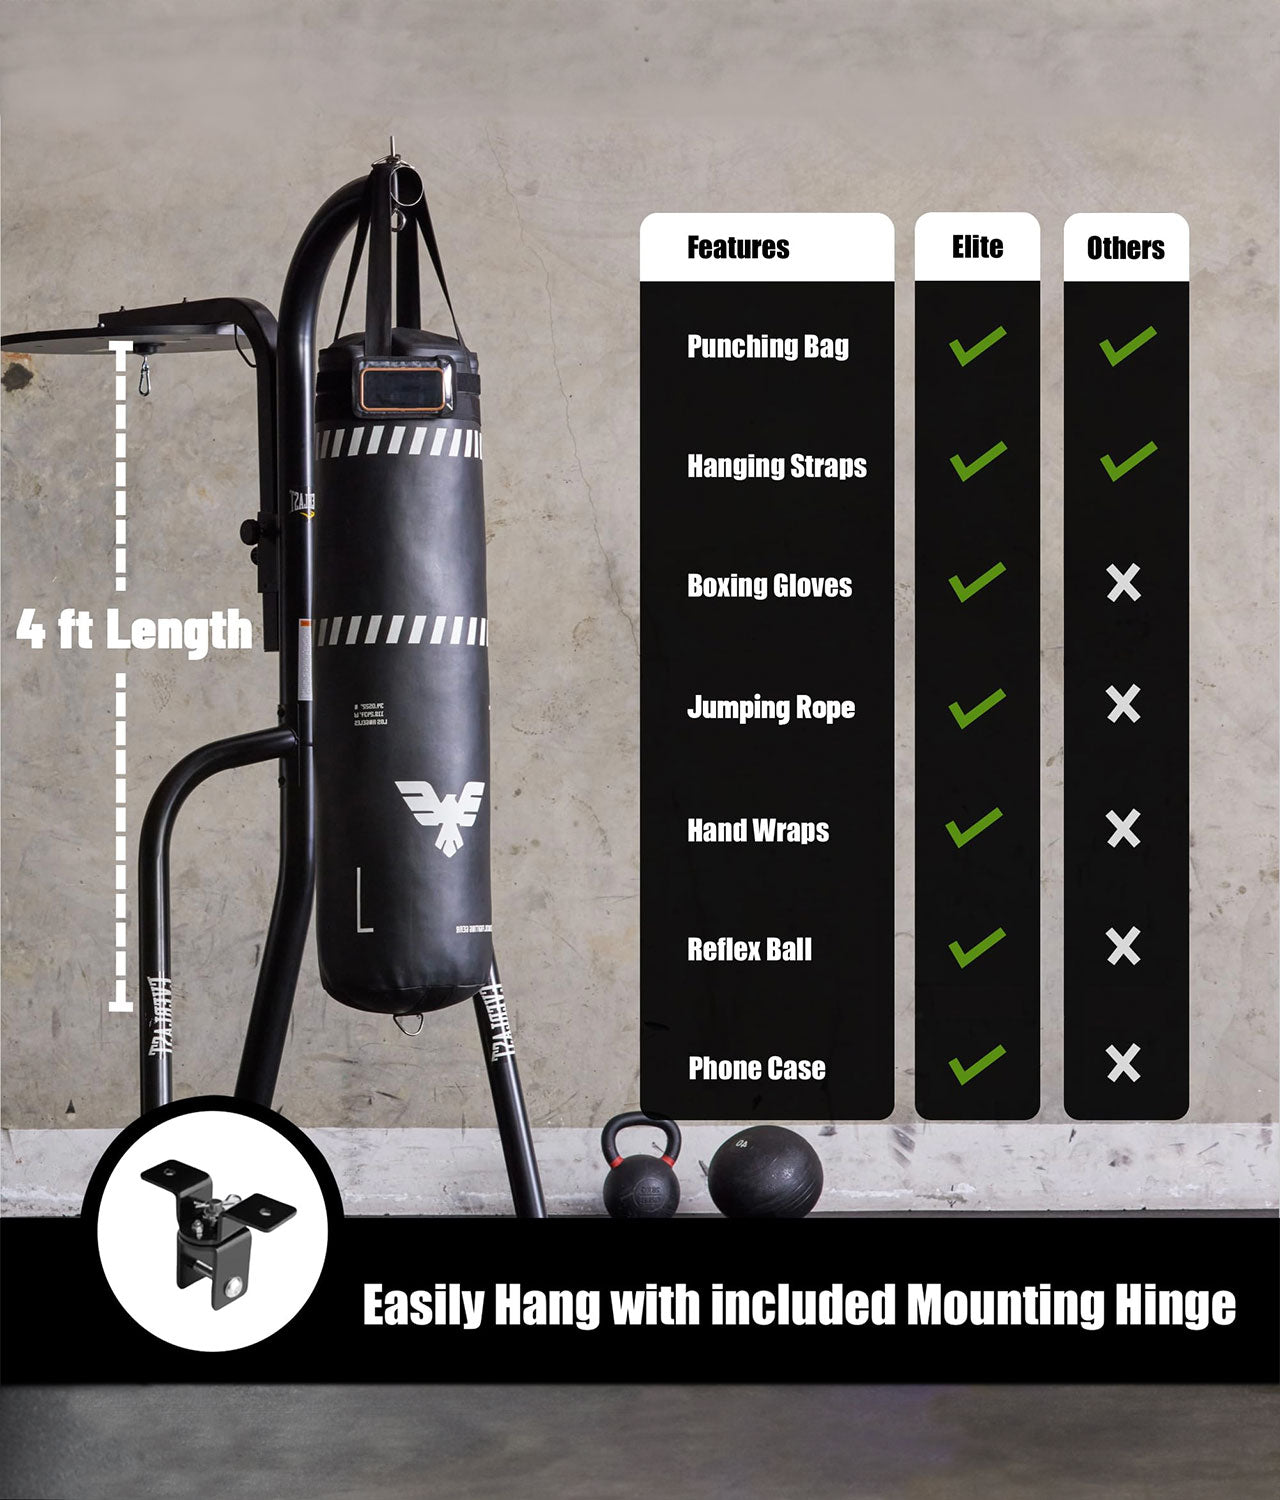 Elite Sports Adults 4 ft Essential Boxing Punching Bag Set Features